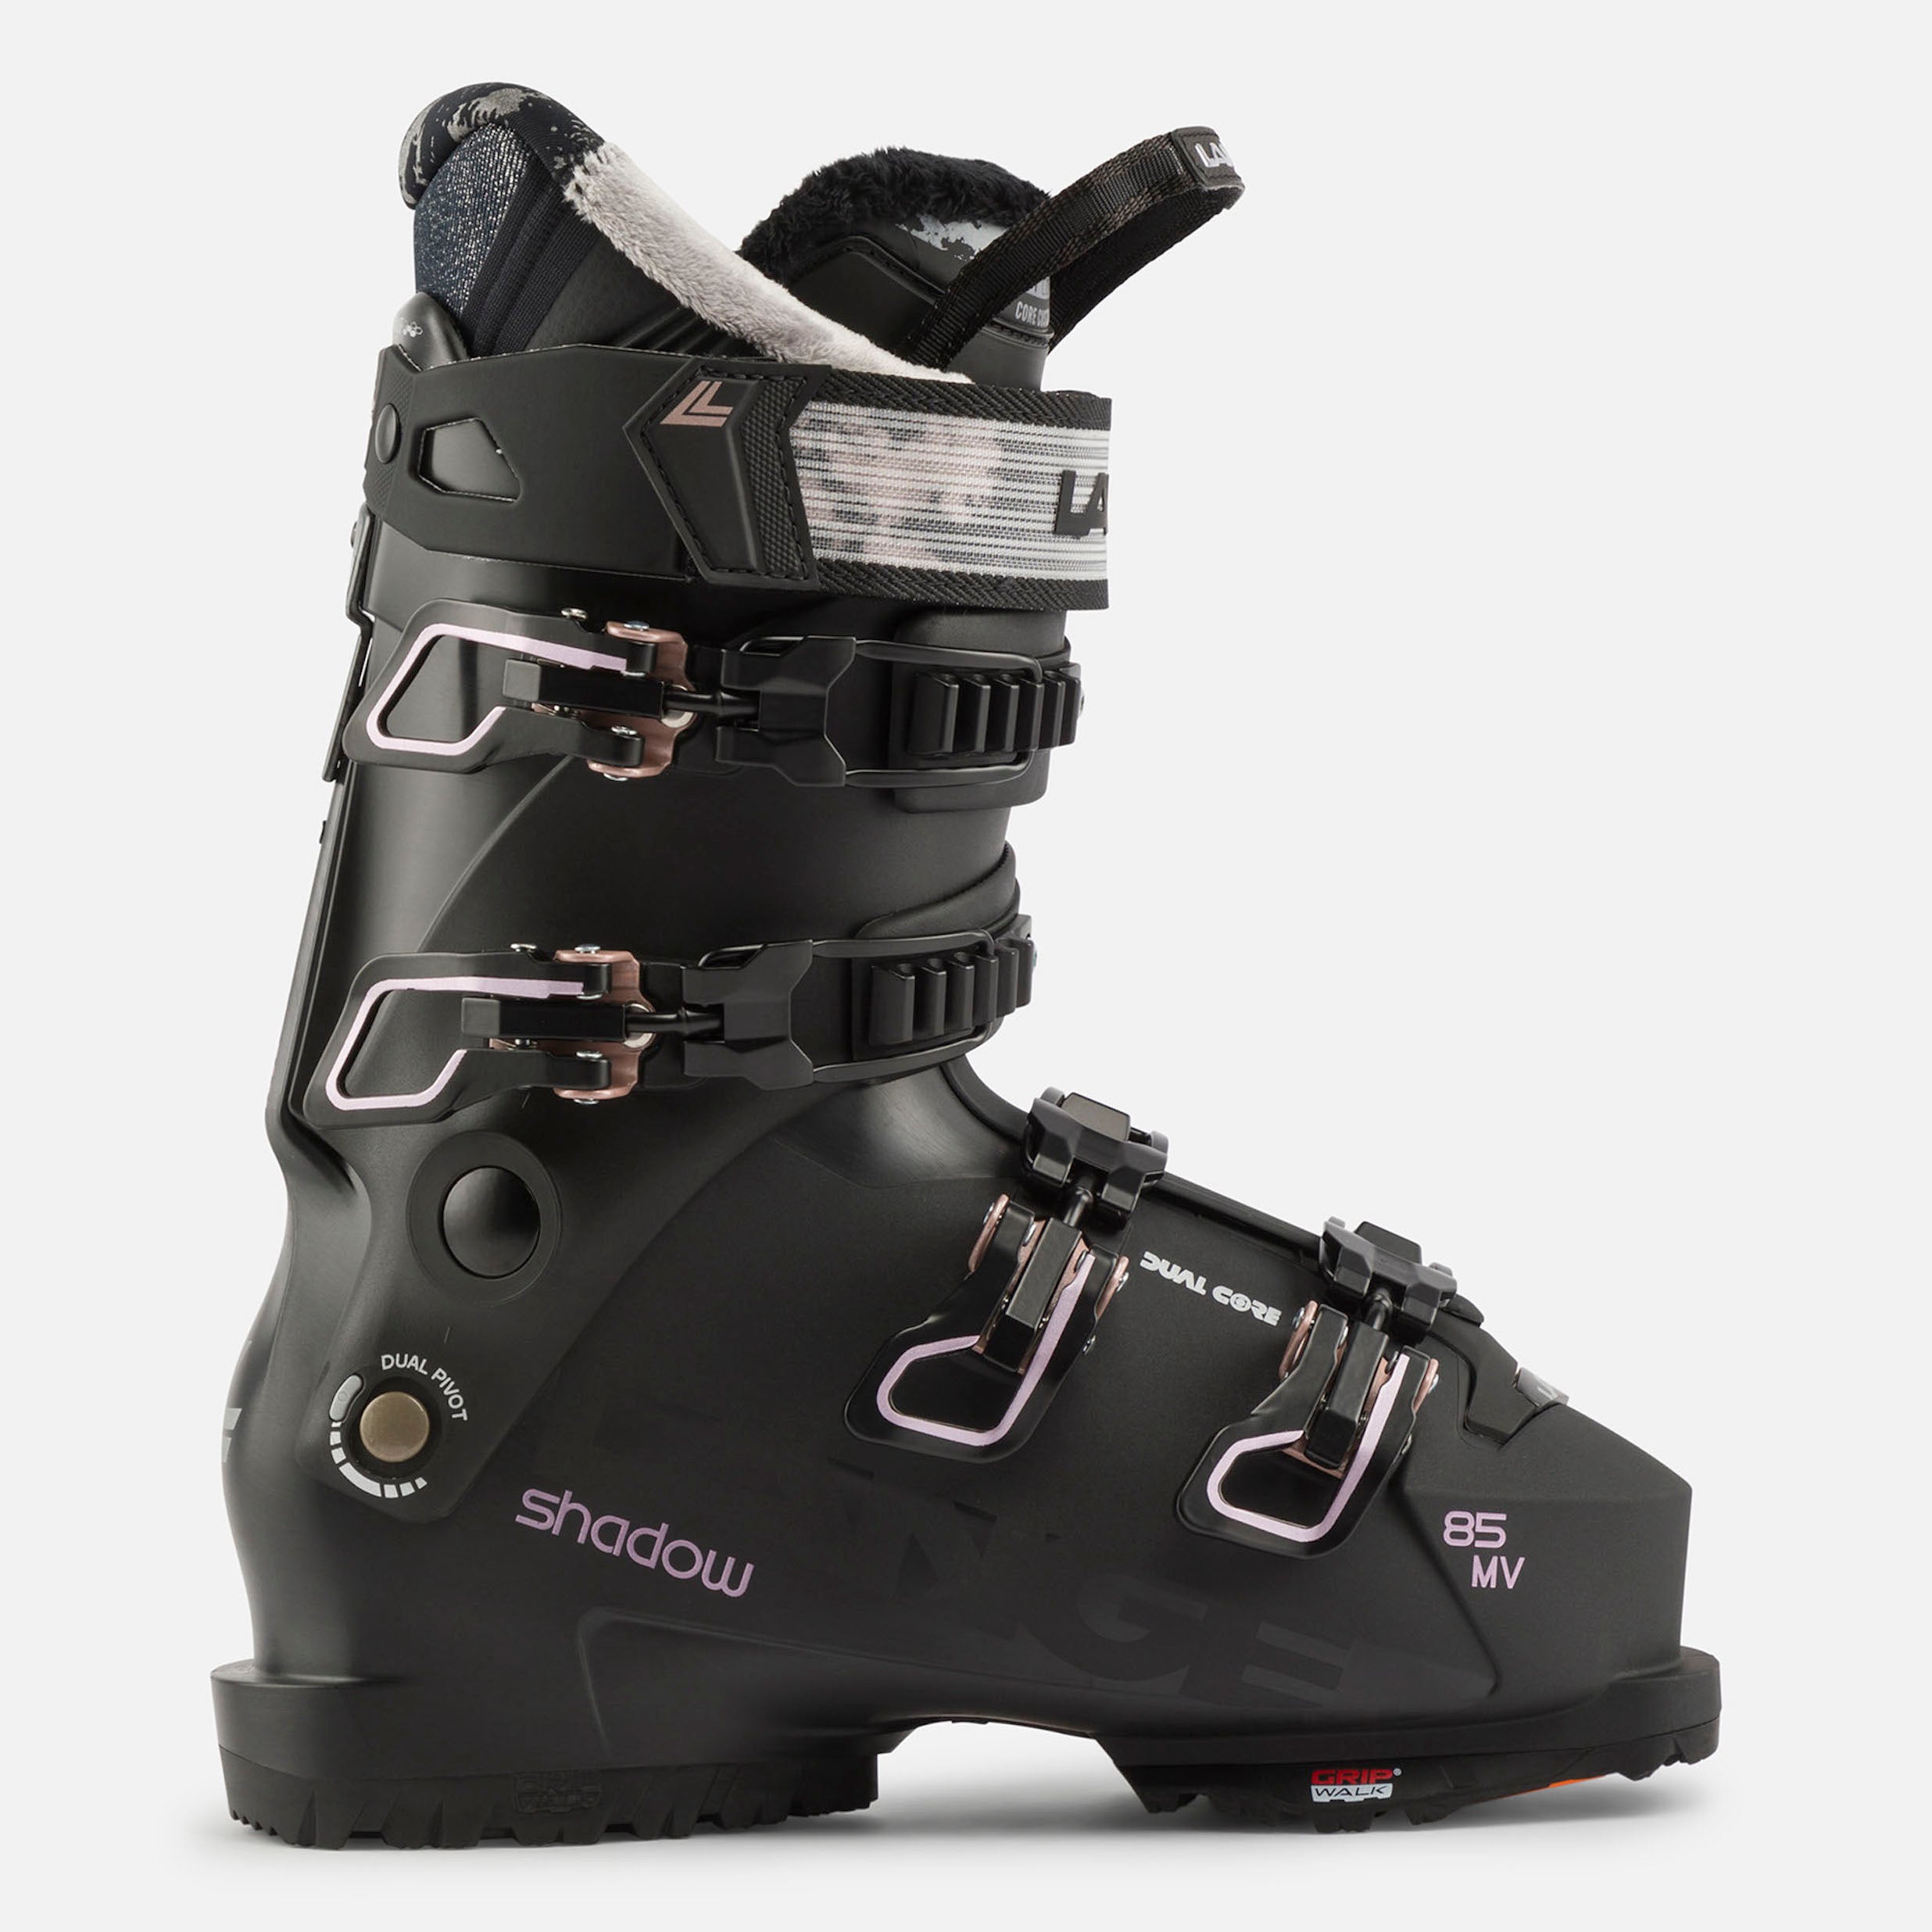 Women's Lange Shadow 85 MV ski boot, all black with light pink accents.